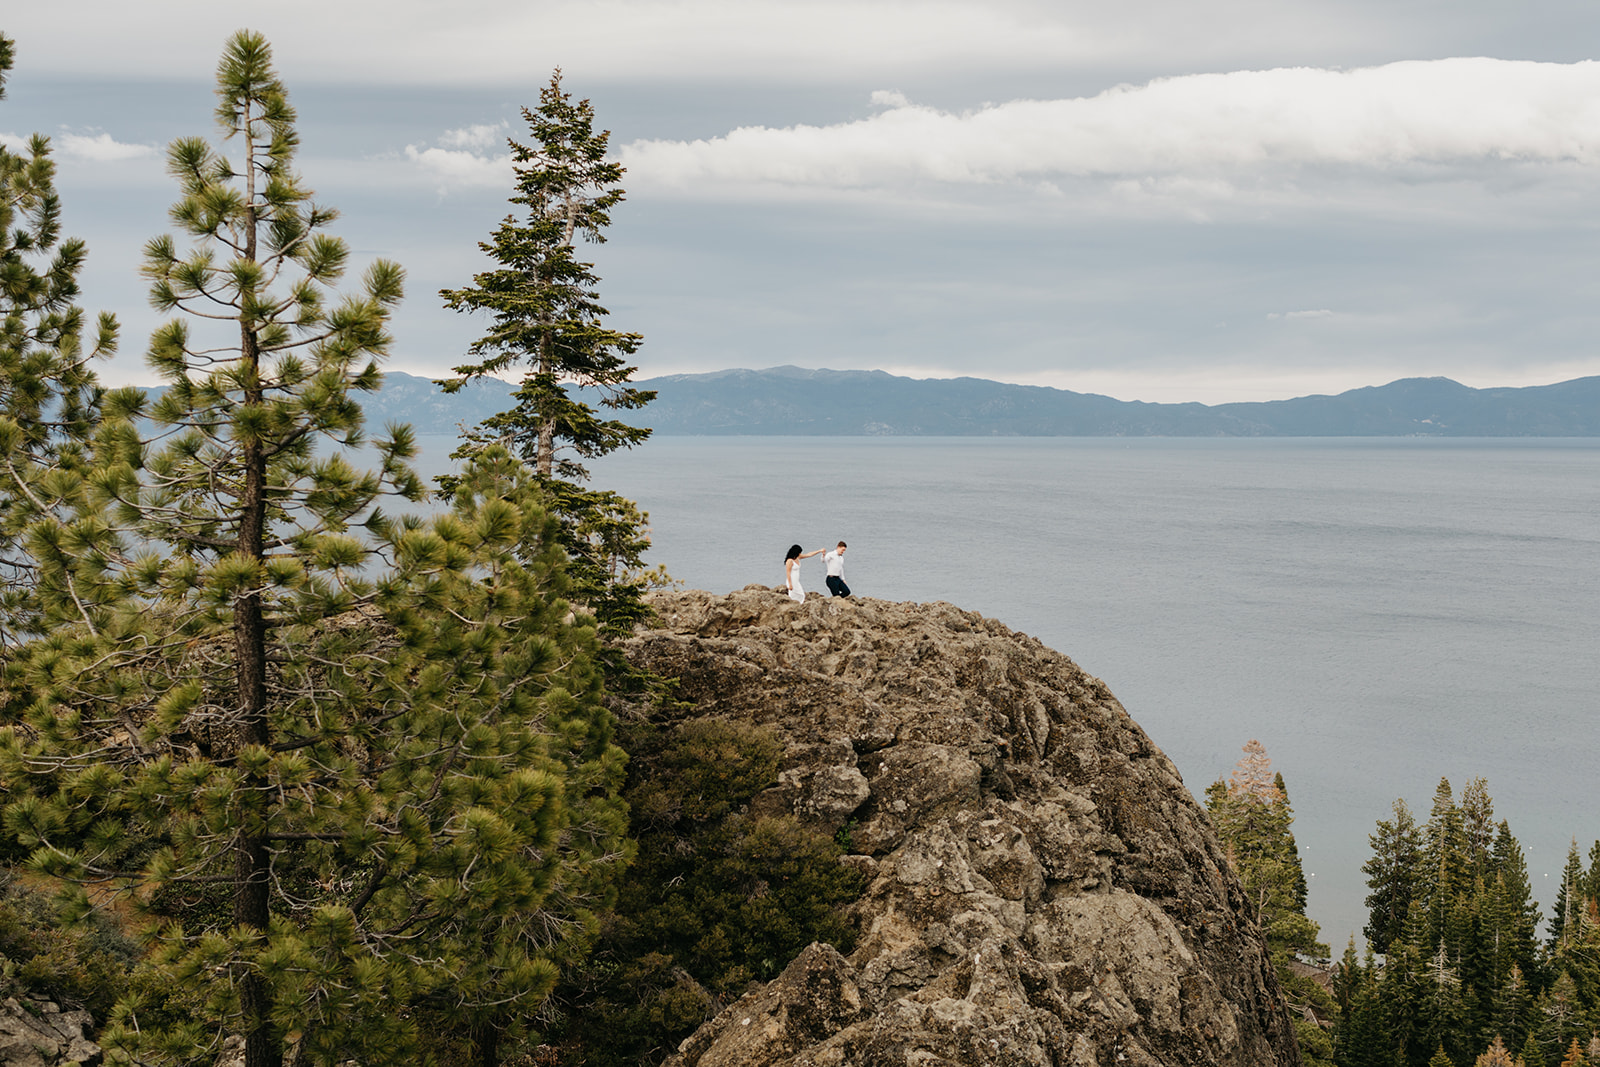 A far away photograph of a couple walking across a moutain ride line in north lake tahoe california